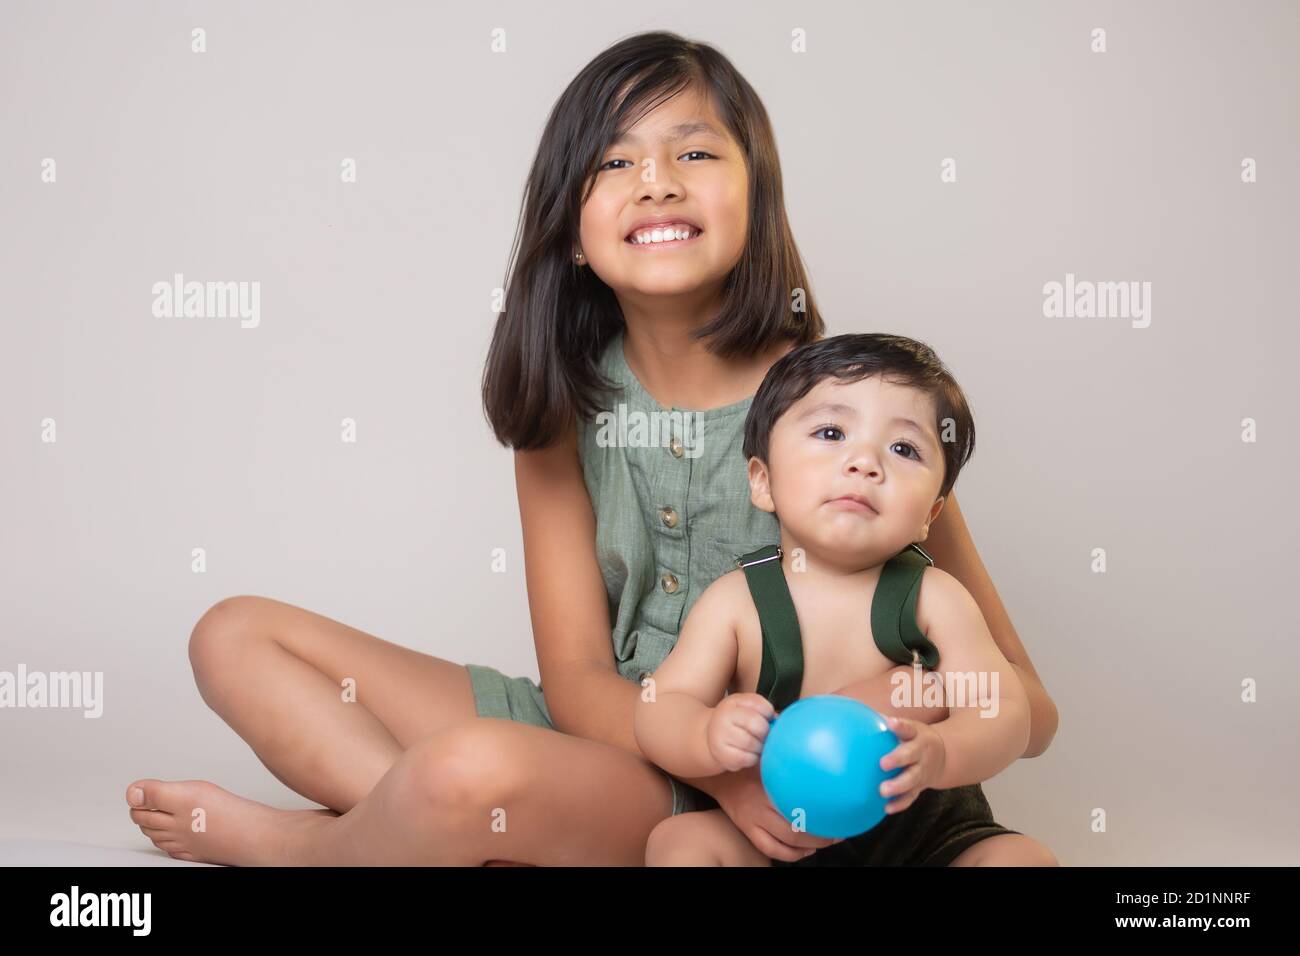 Mexican siblings smiling and cryingisolated Stock Photo